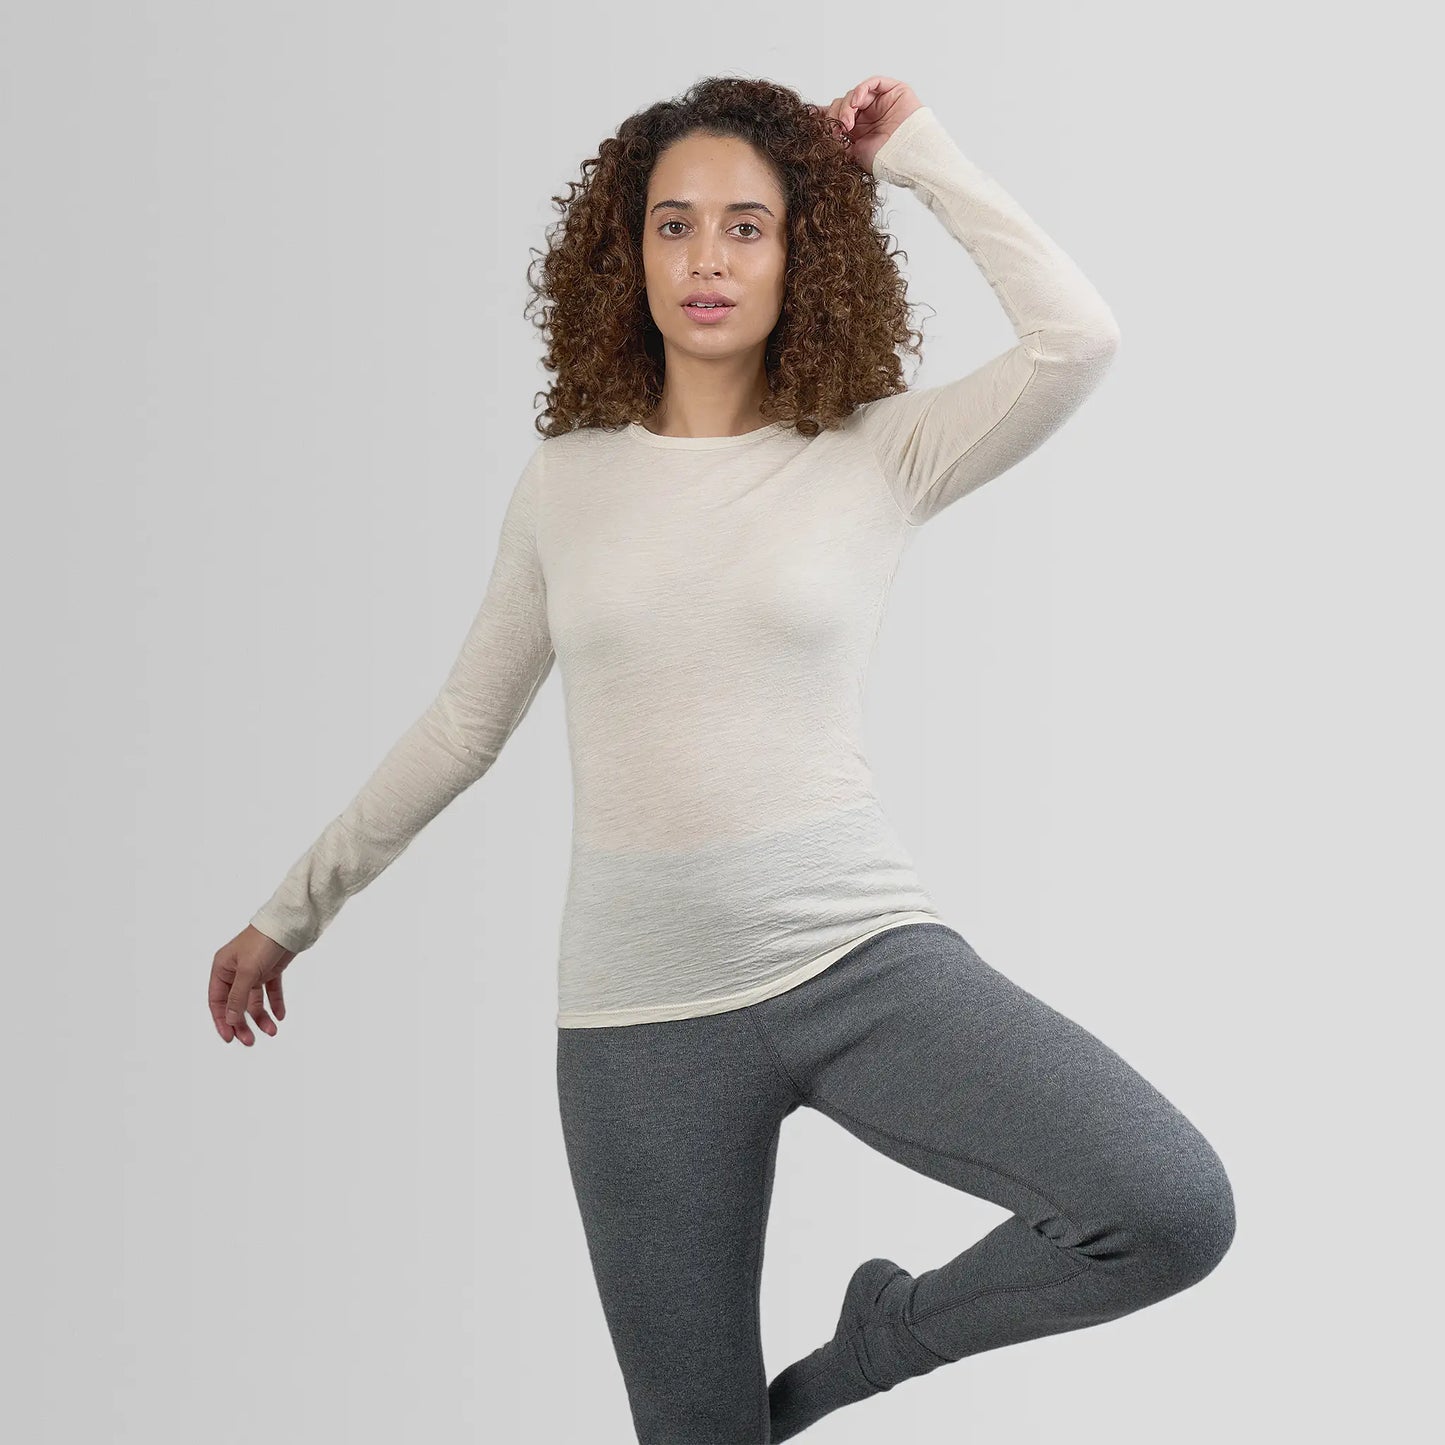 Women's Alpaca Wool Long Sleeve Base Layer: 160 Ultralight color Natural White